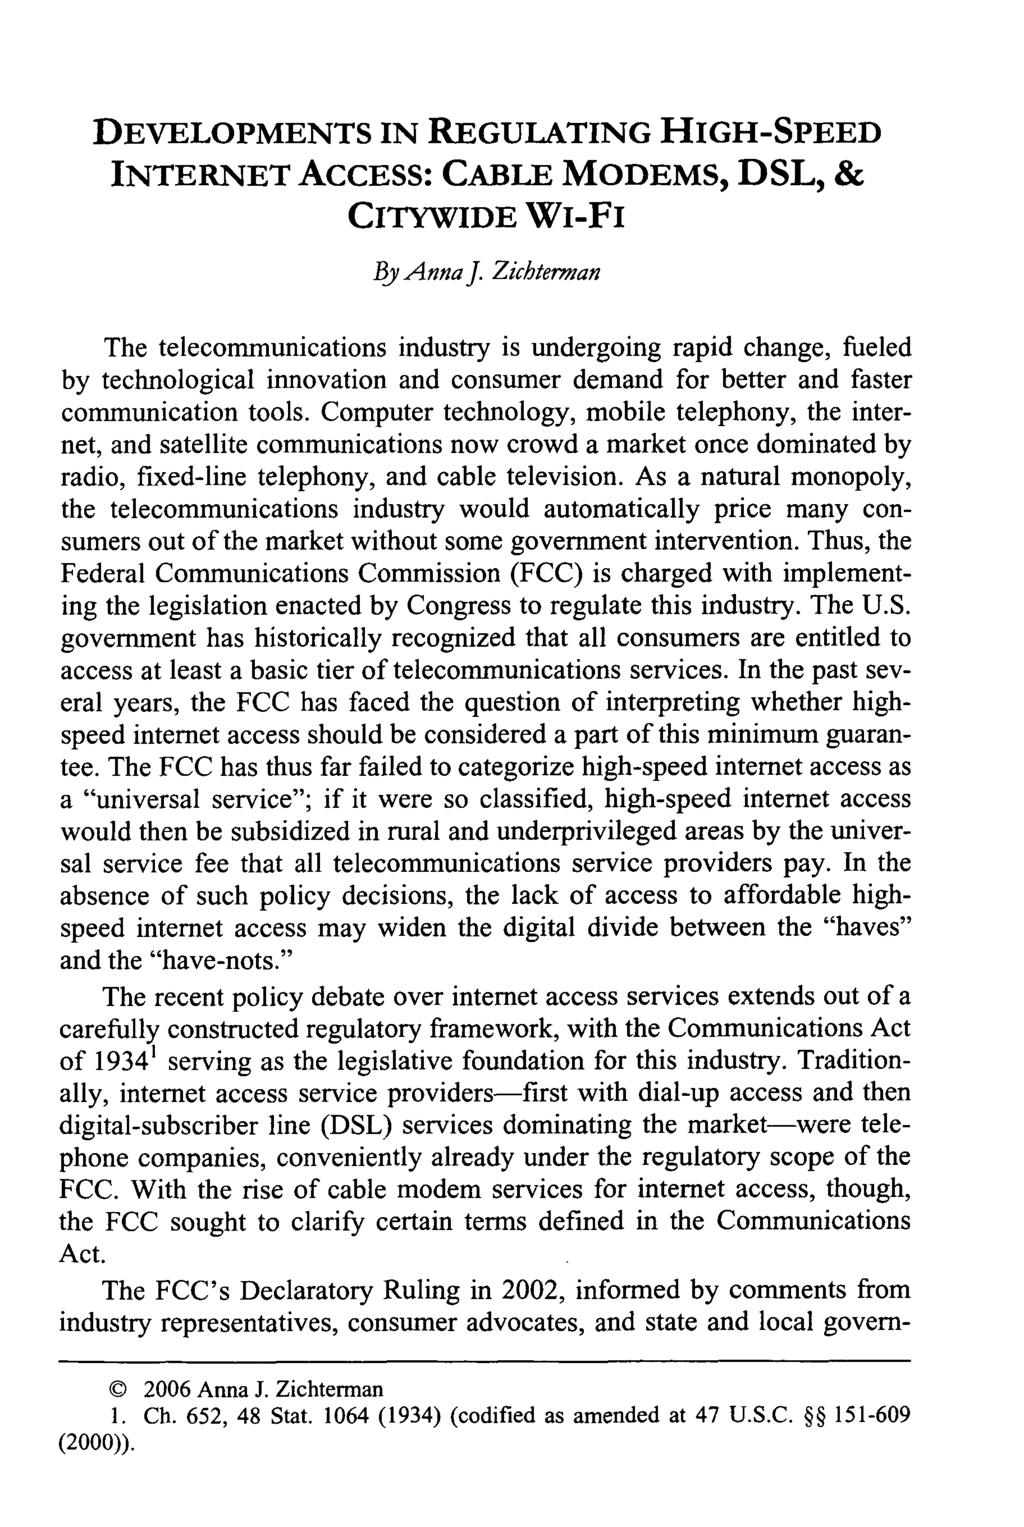 DEVELOPMENTS IN REGULATING HIGH-SPEED INTERNET ACCESS: CABLE MODEMS, DSL, & CITYWIDE Wi-FI By Anna J.